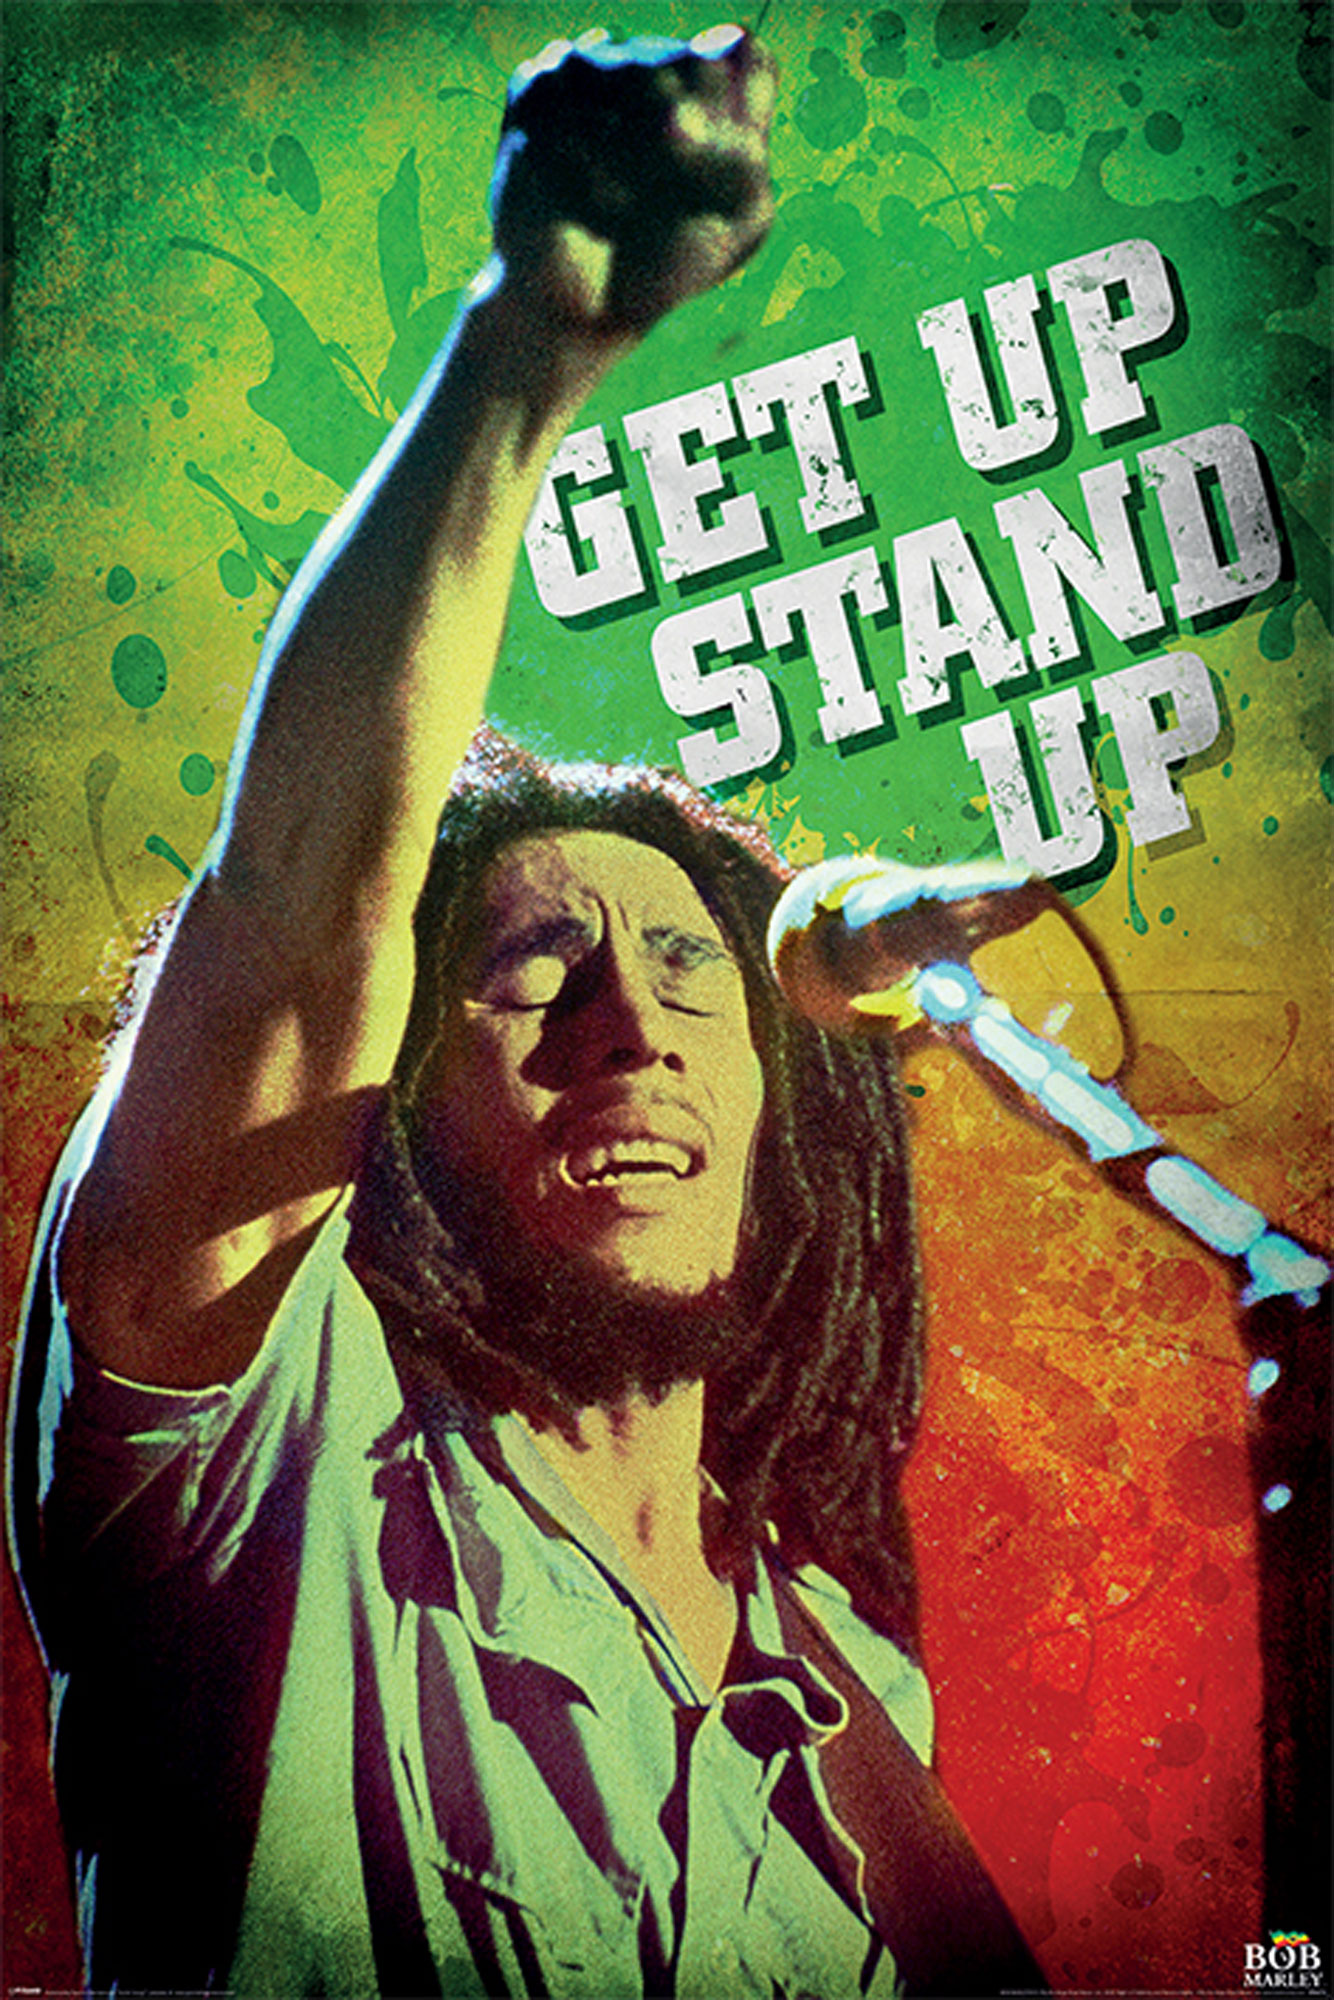 Marley, Bob - Get Up Up Stand